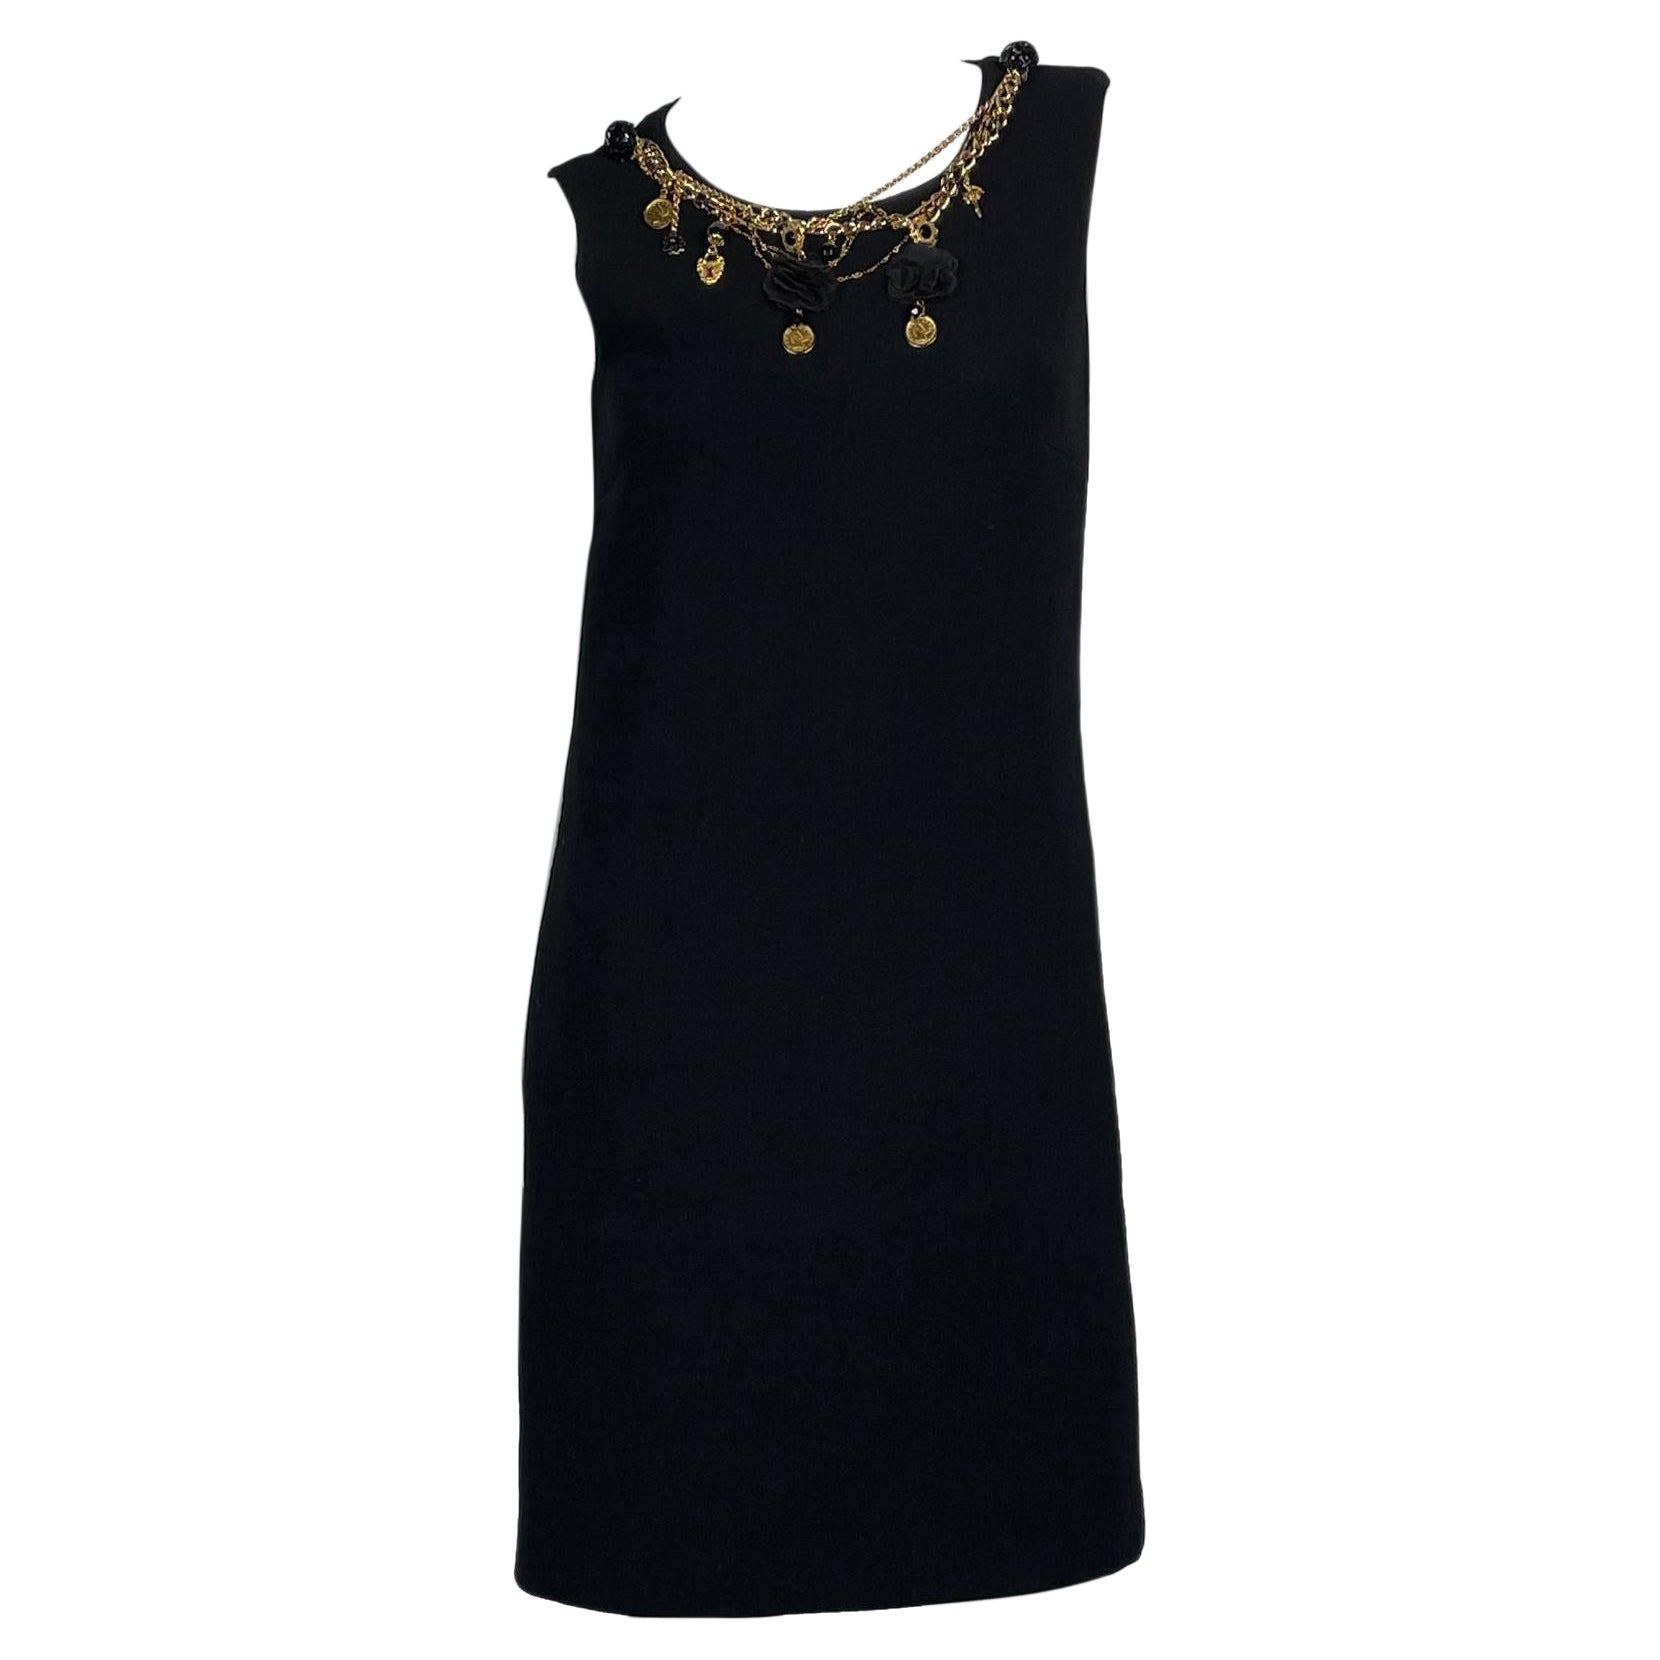 Dolce&Gabbana black wool mini dress with medallions necklace, 2010s